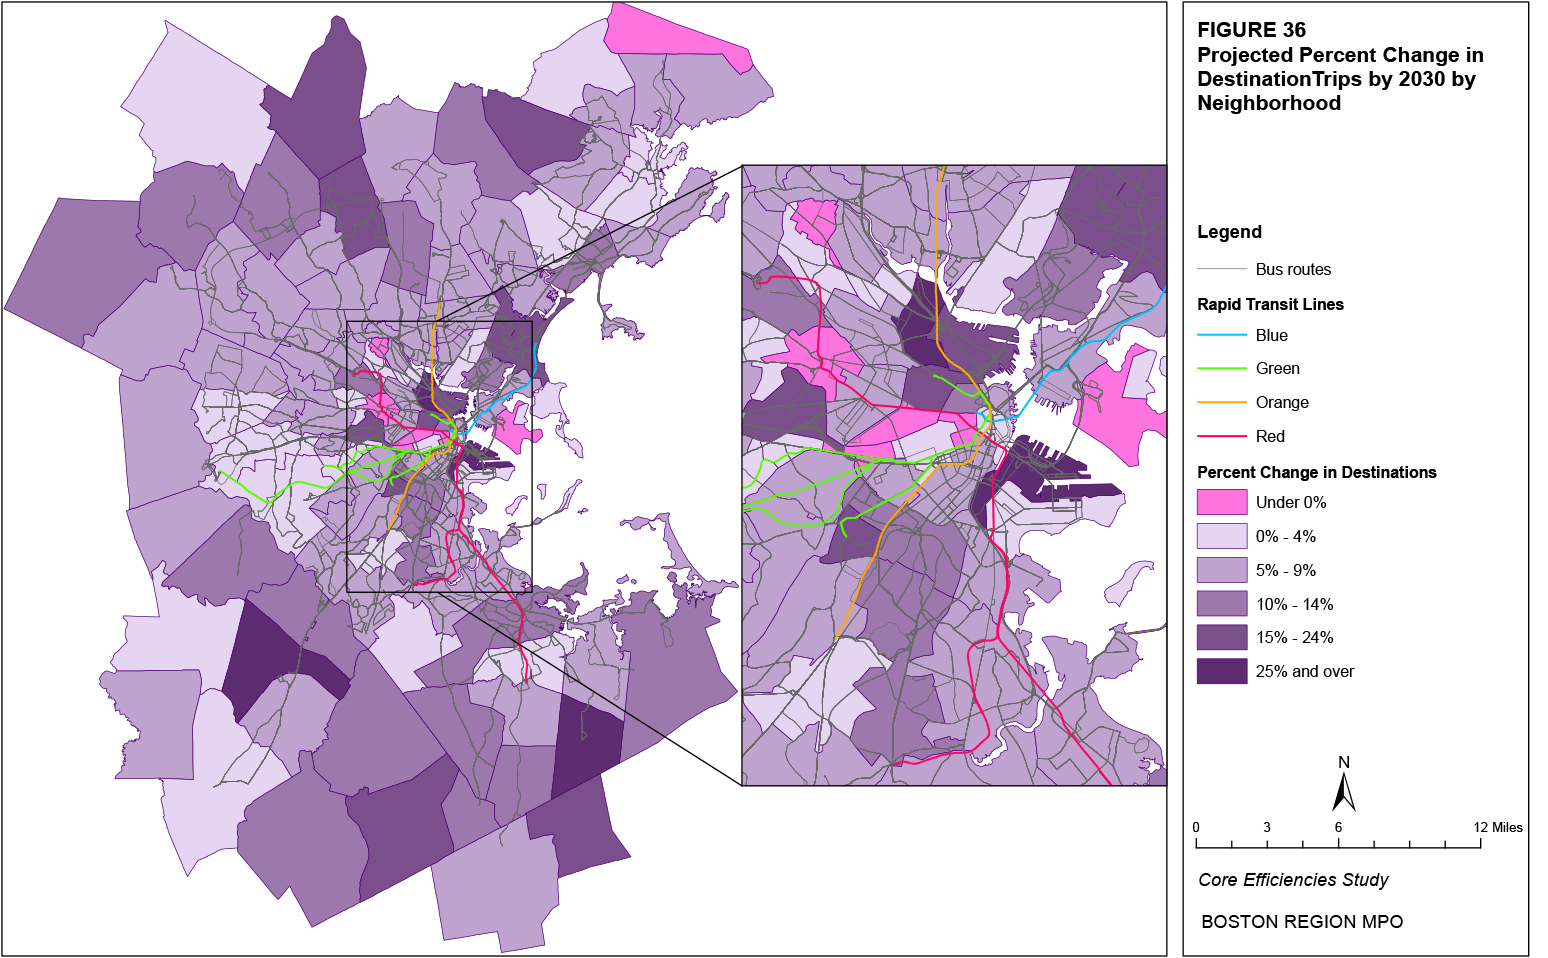 This map shows the projected percent change in destination trips by neighborhood.